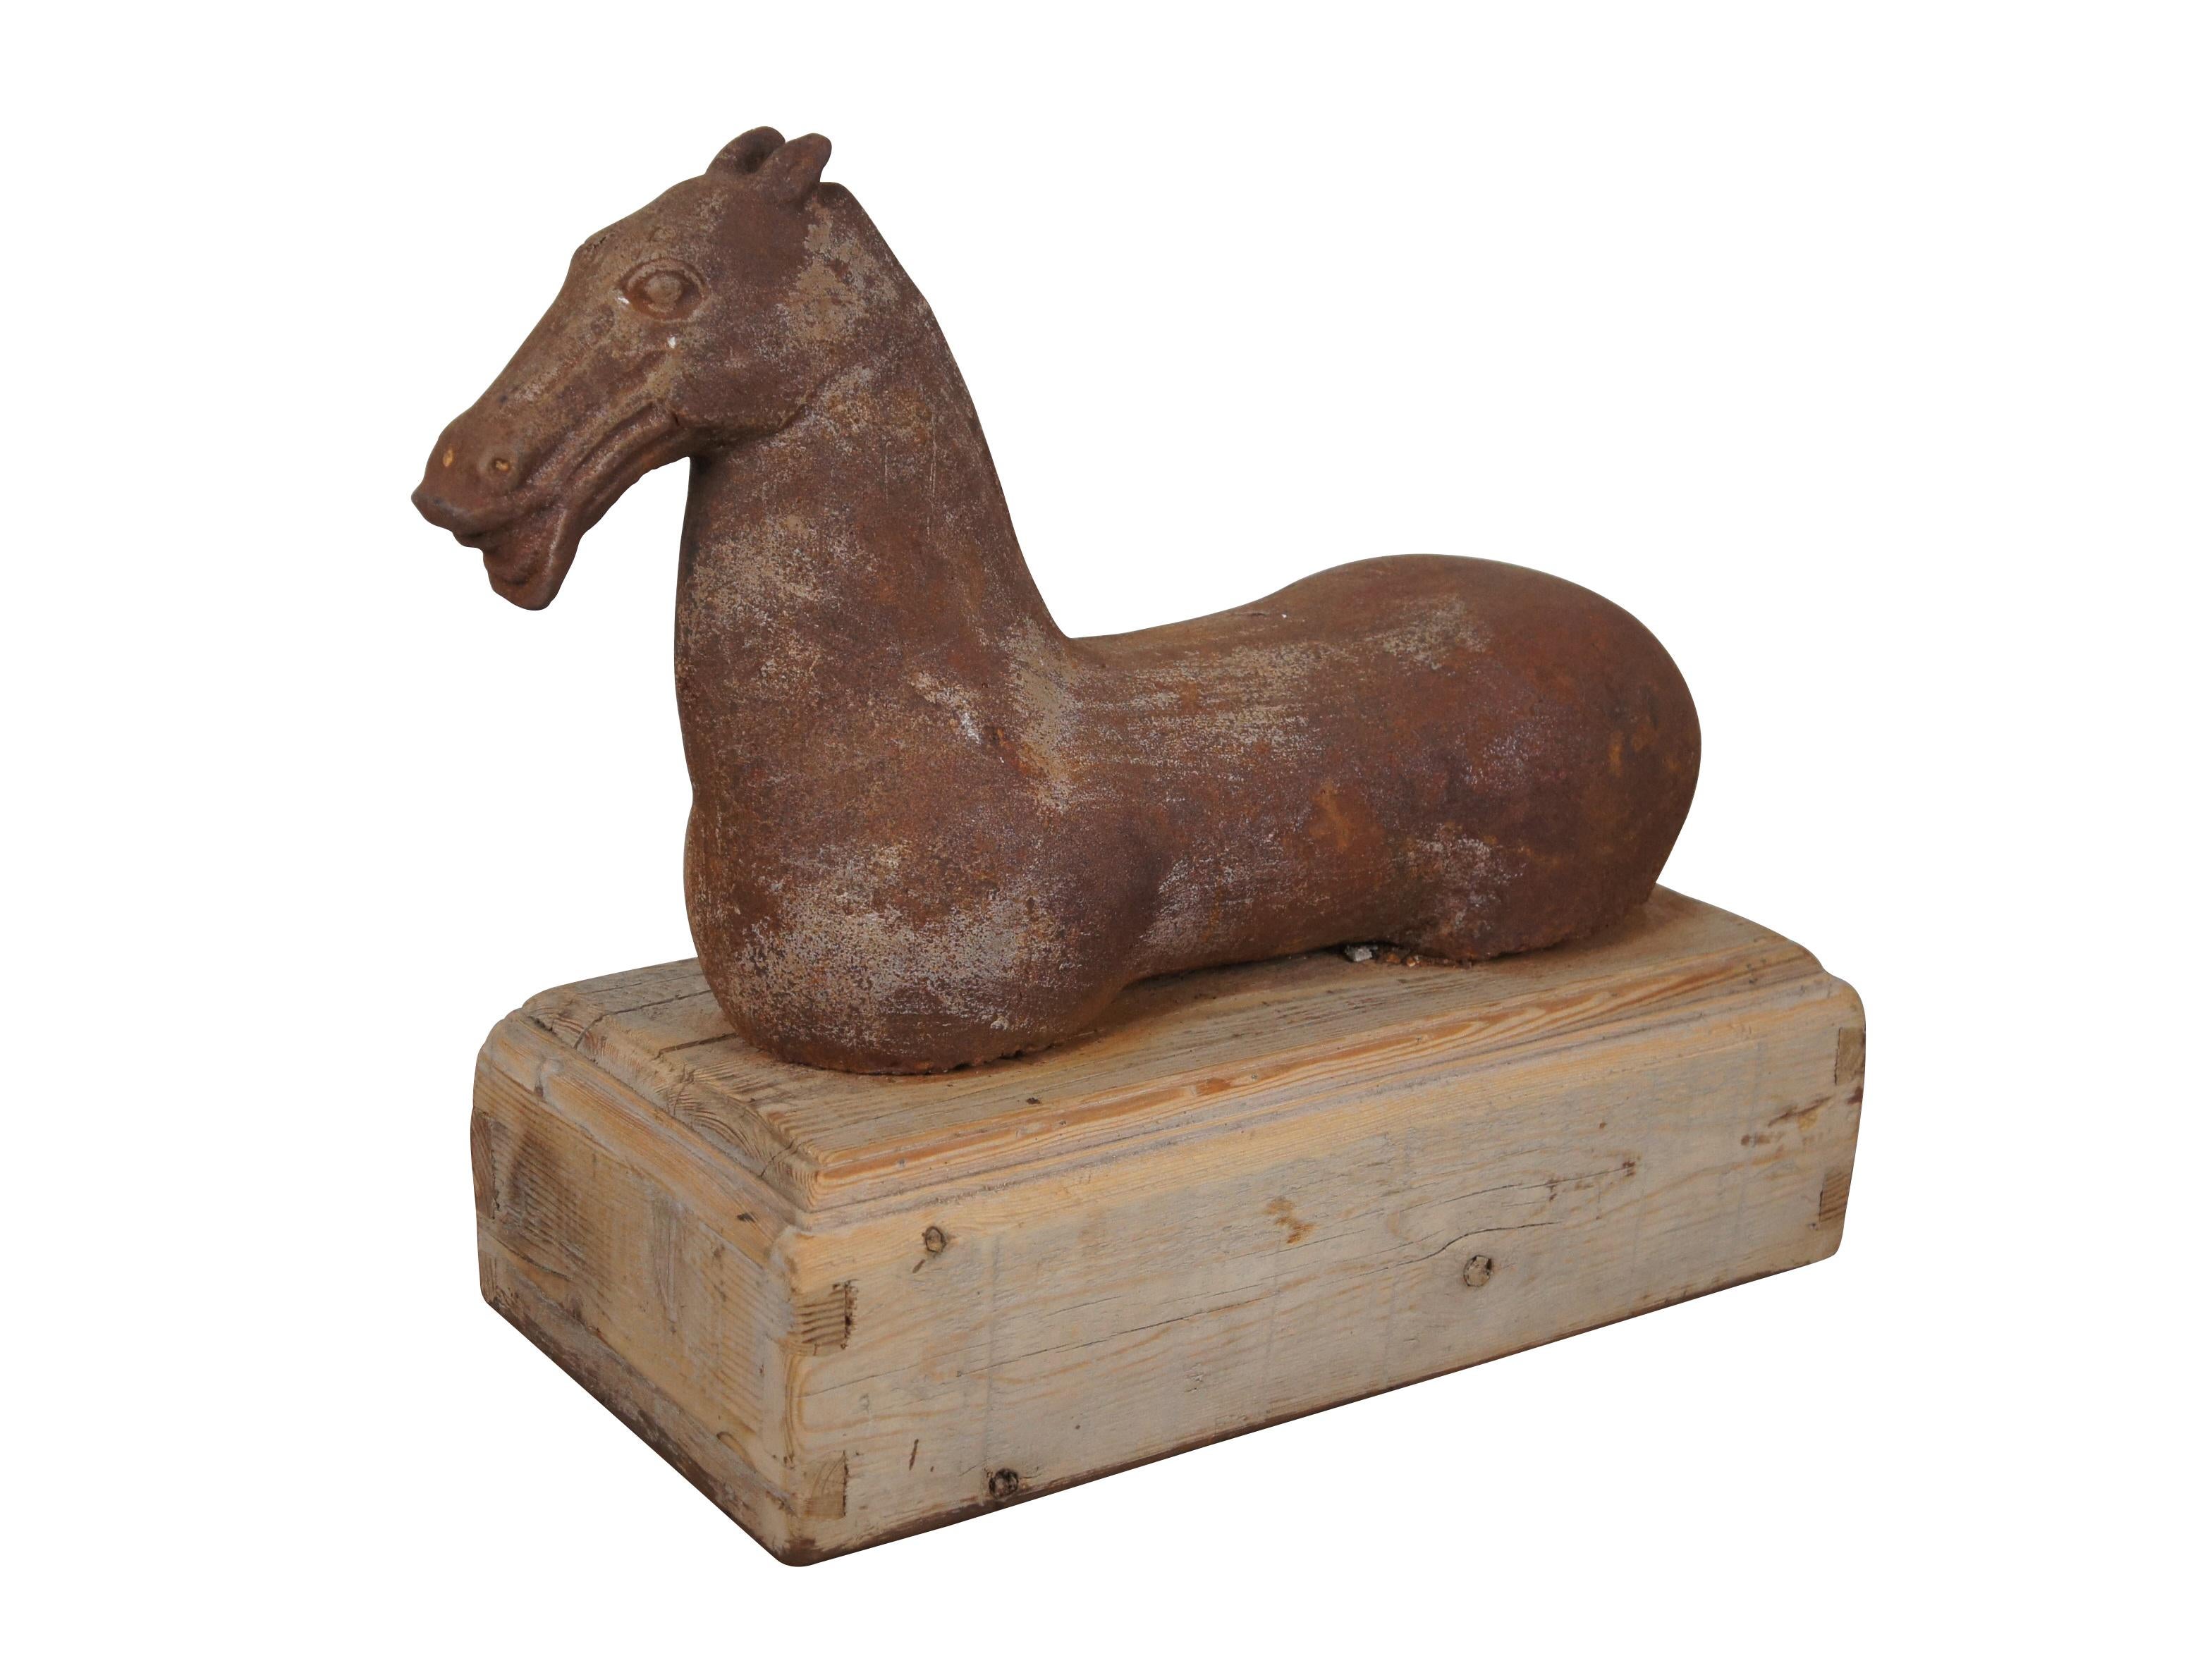 20th century cast iron sculpture or hitching post of a Han (or Tang) Dynasty style horse with muscular cheeks, open mouth and no legs. Mounted on a hollow, dovetailed, un-finished wood base.

Dimensions:
20.75